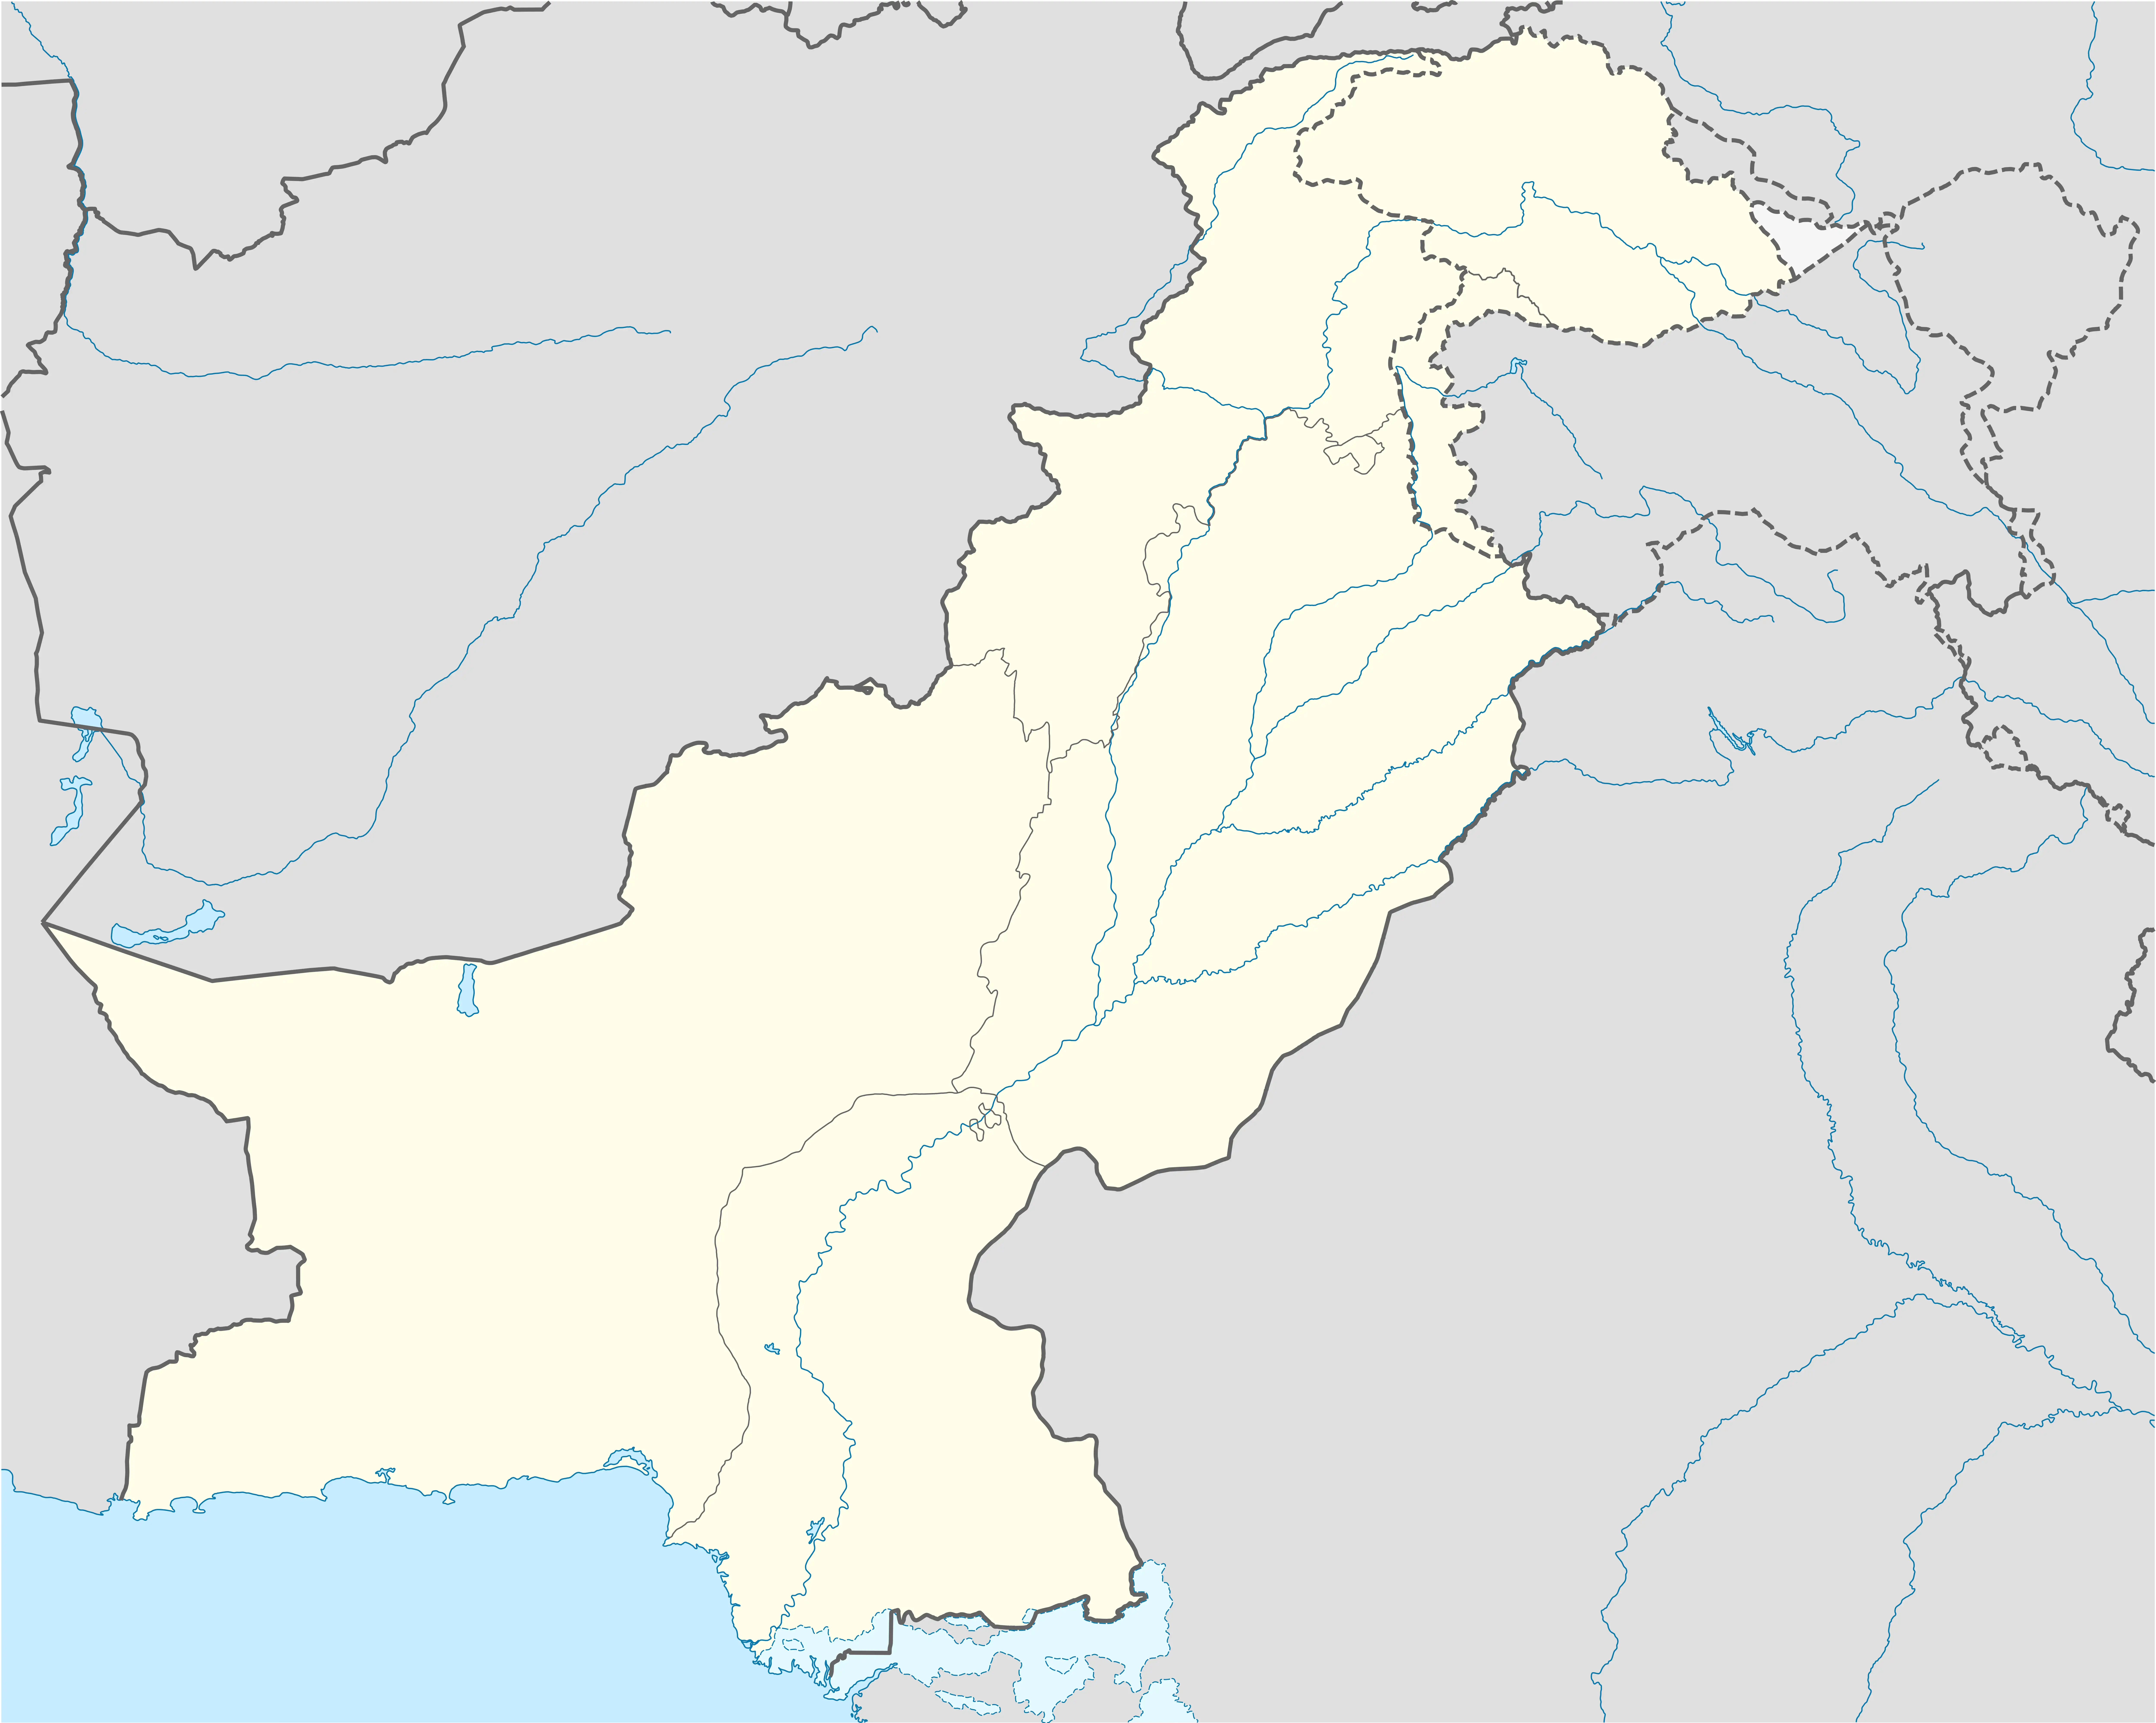 Khairpur is located in Pakistan